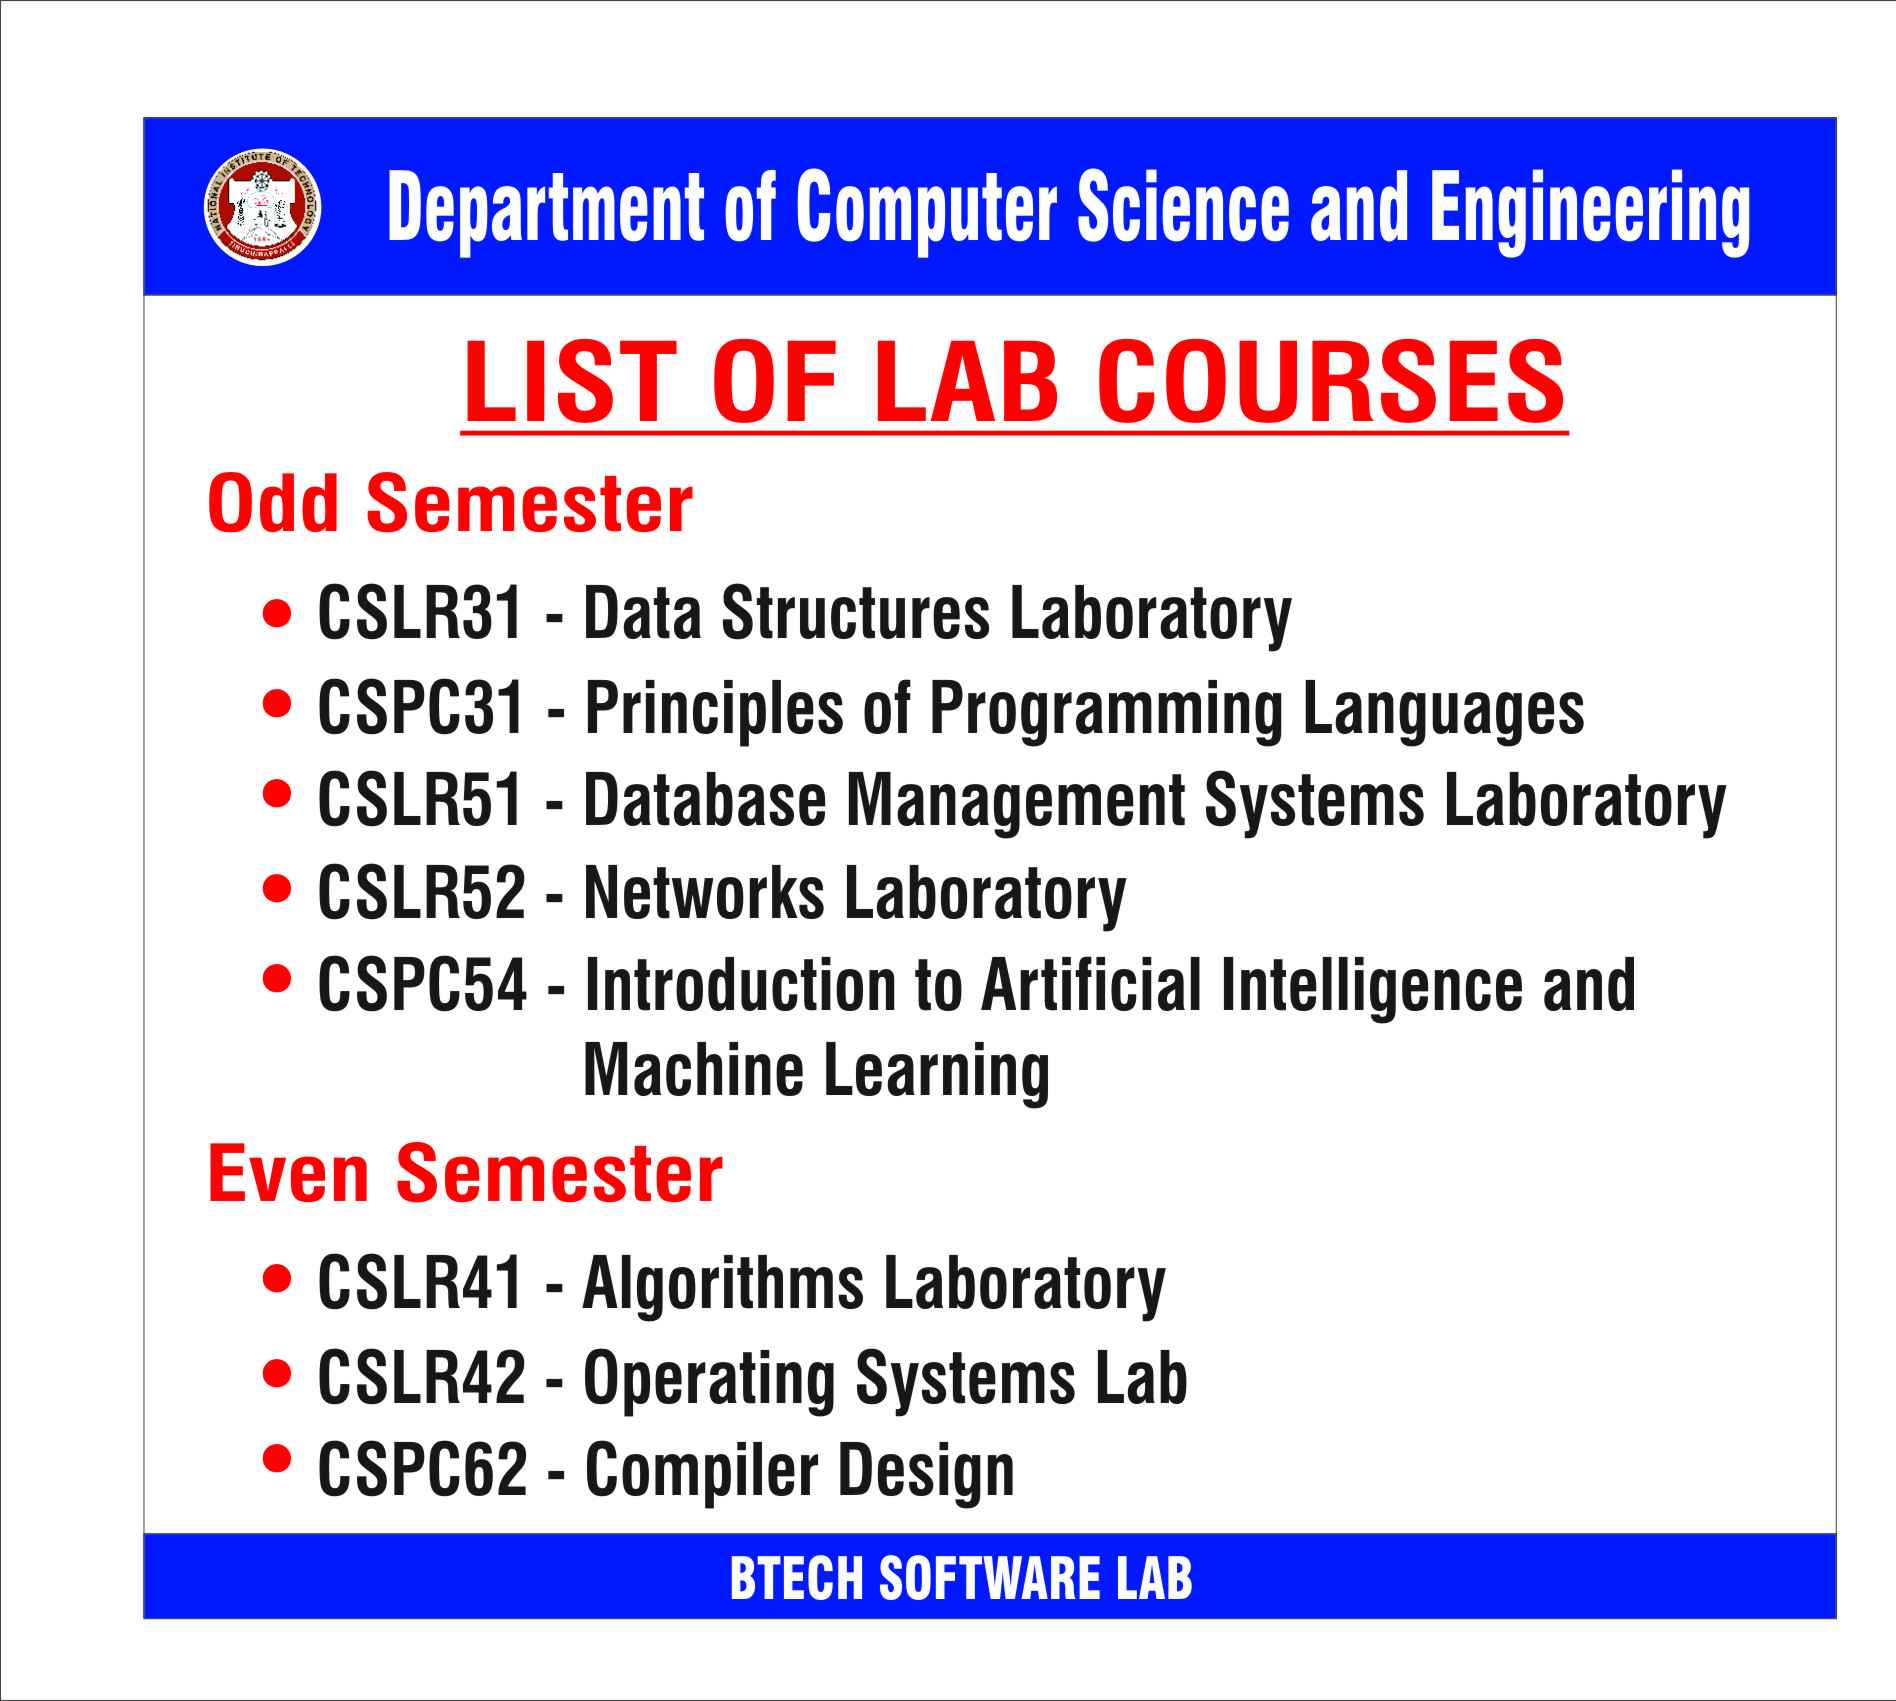 BTech Software Lab Courses